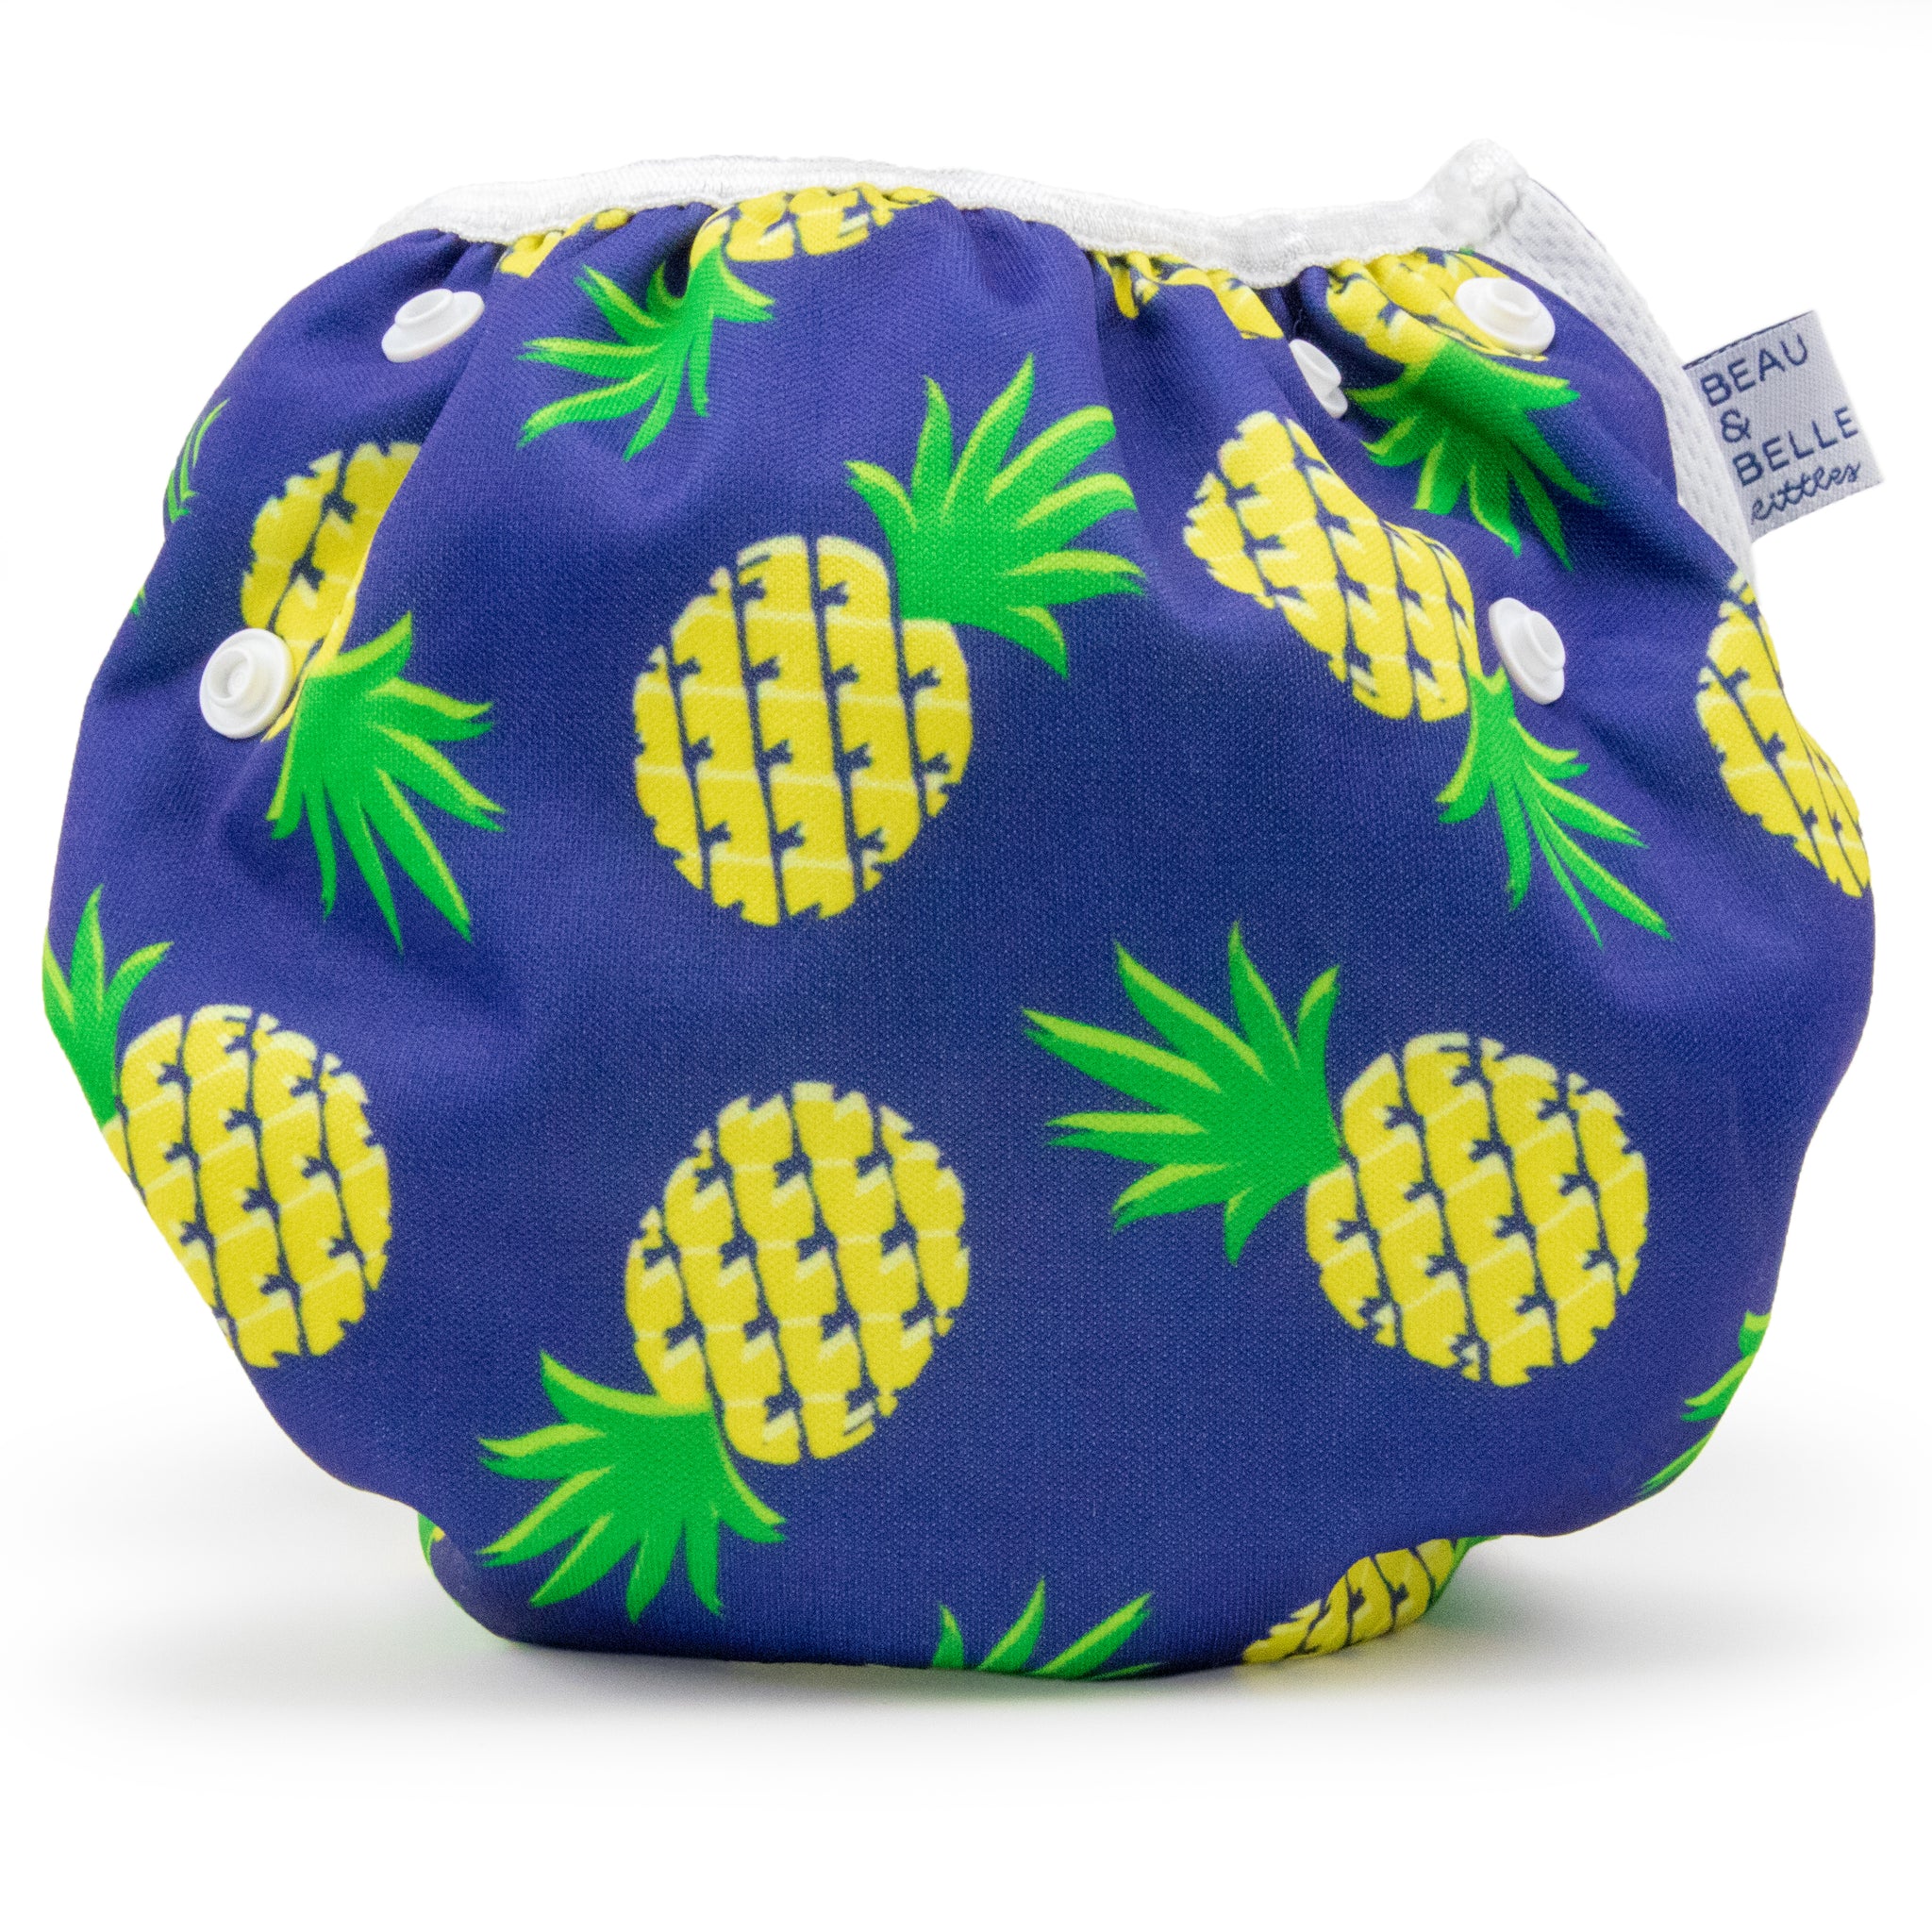 Beau and Belle Littles Swim Diaper, Regular Size, Navy blue with pineapples